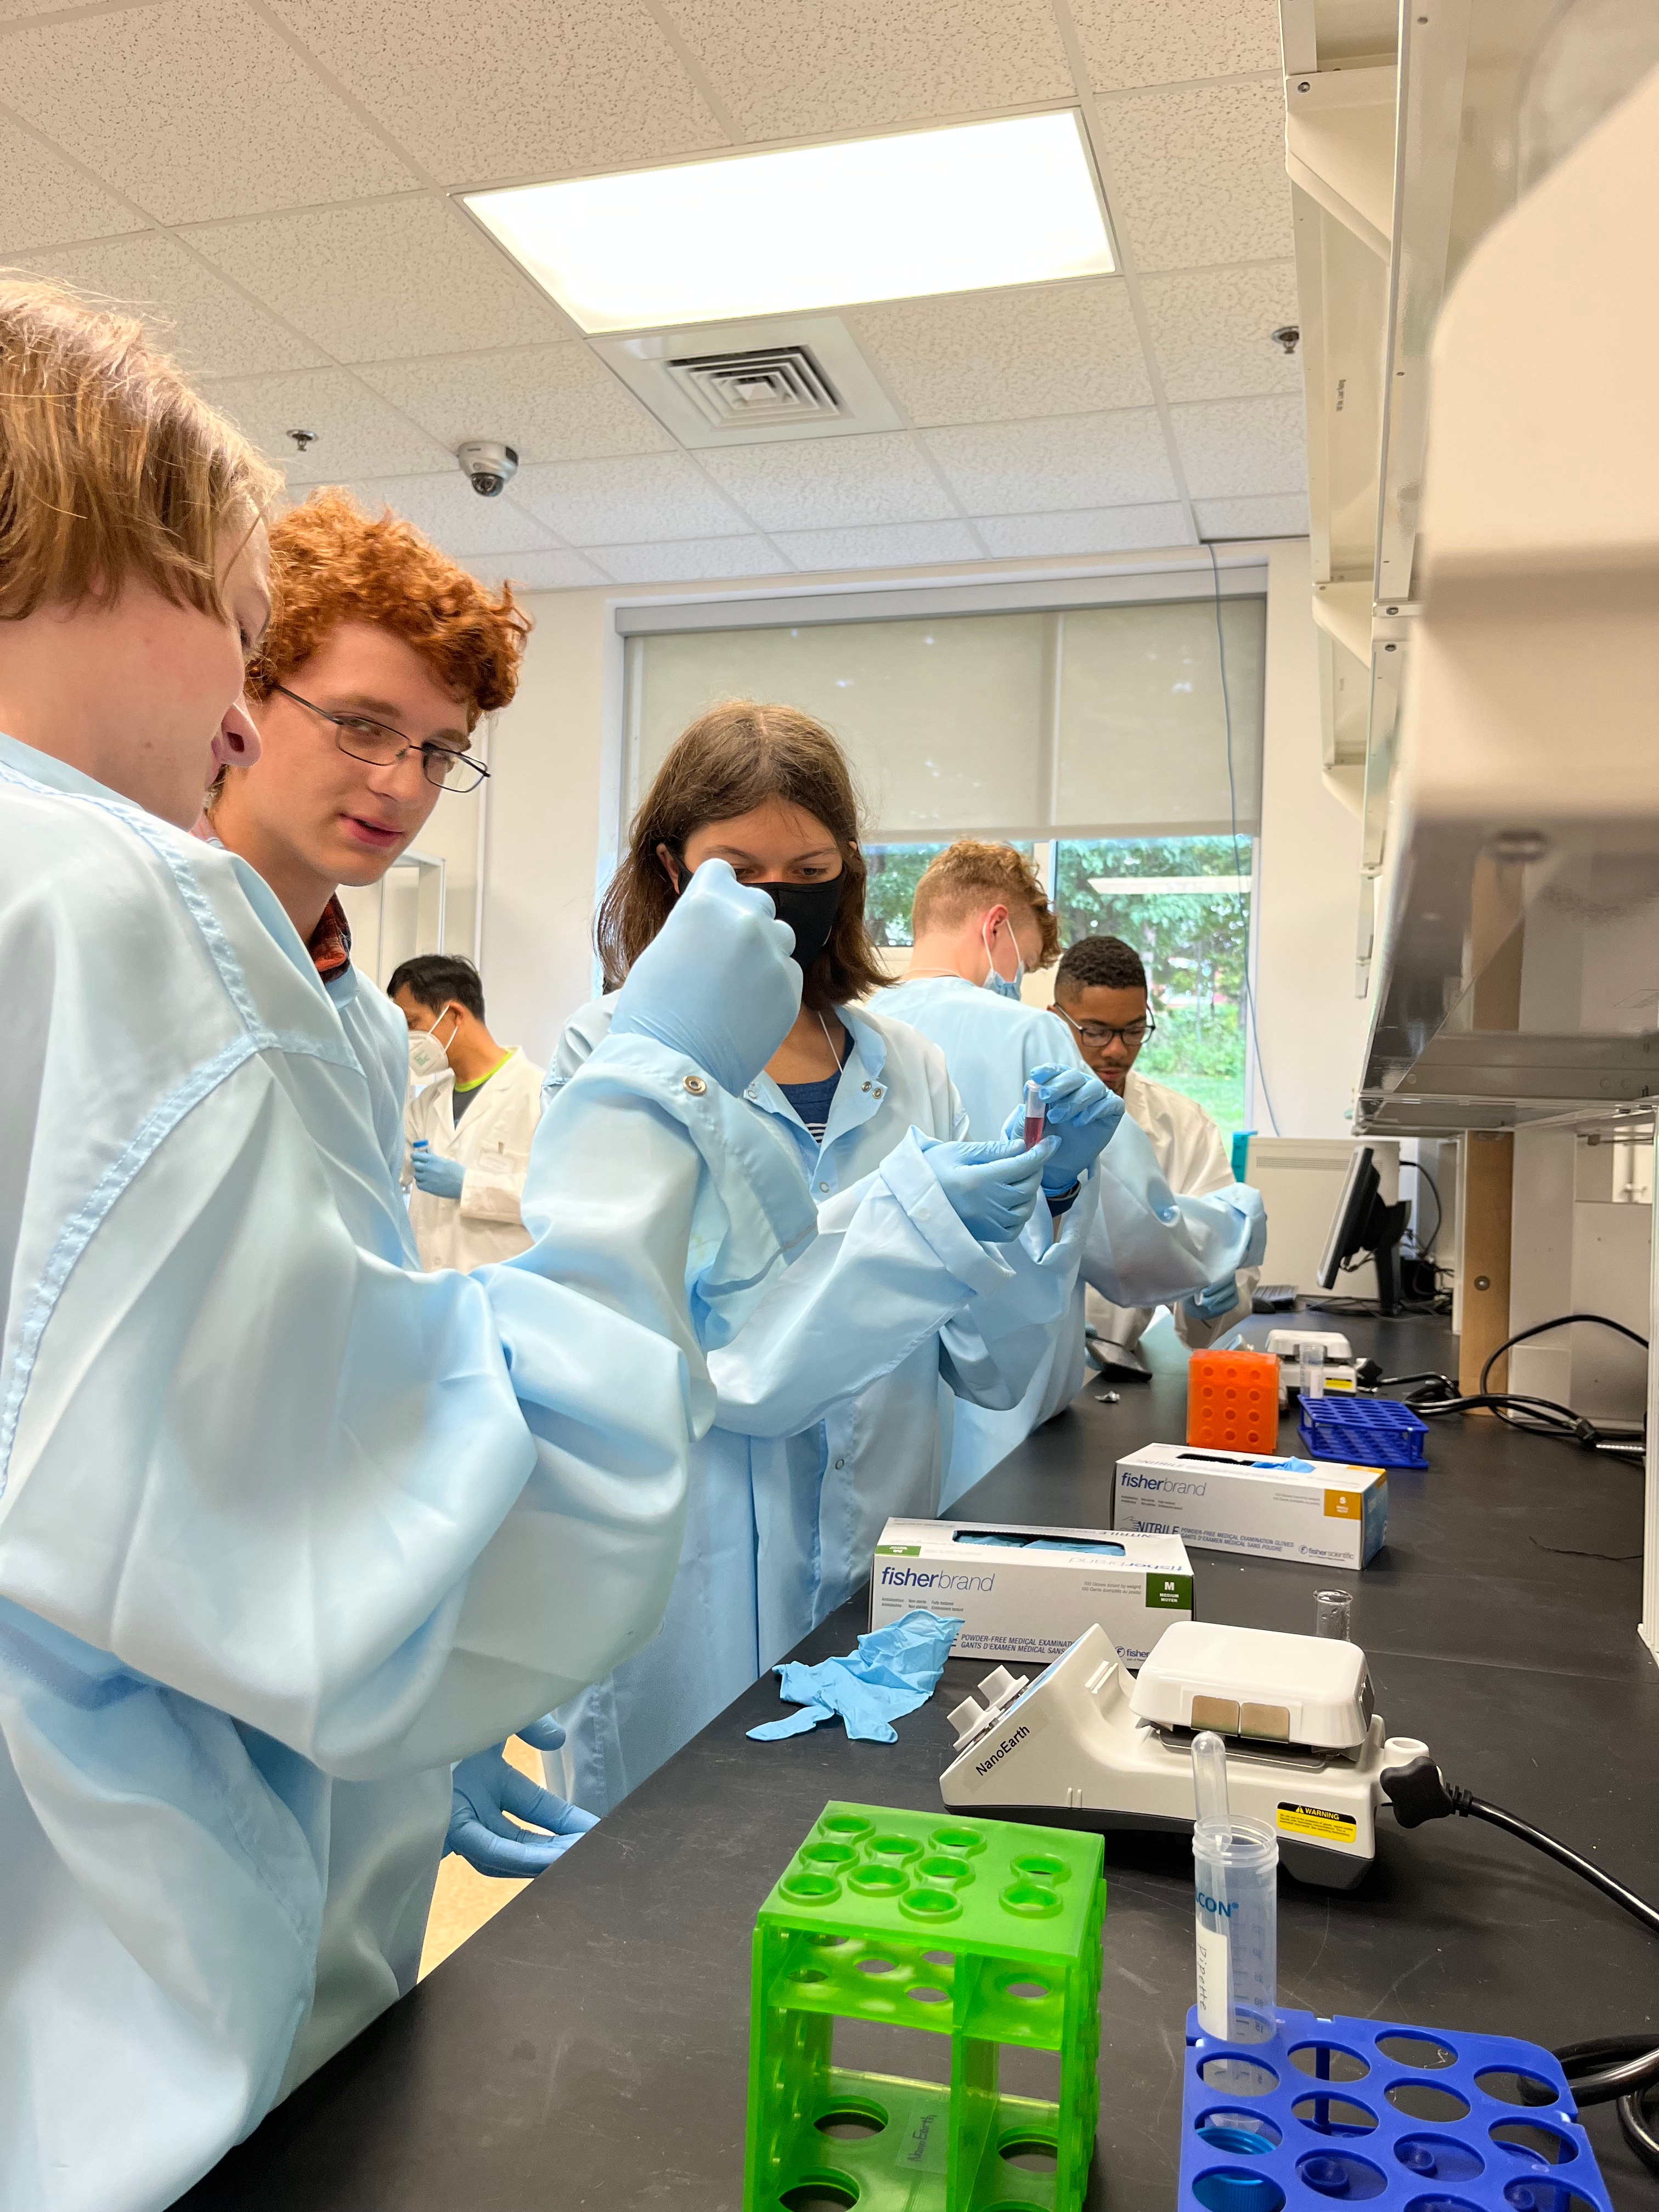 Students in lab coats synthesize gold nanoparticles